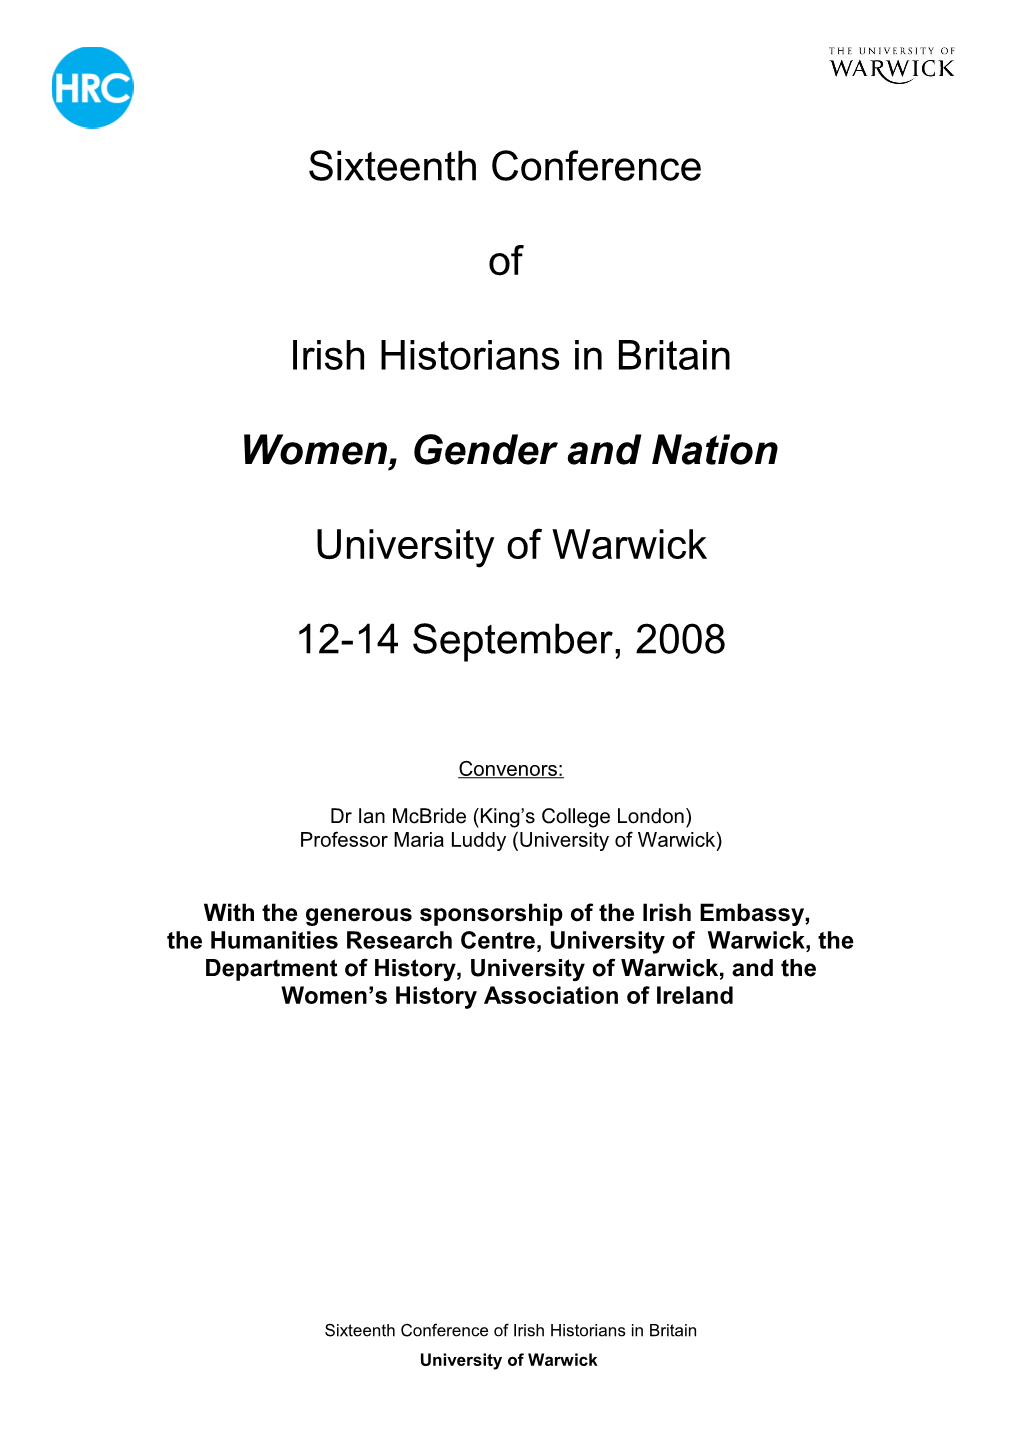 Women, Gender and Nation